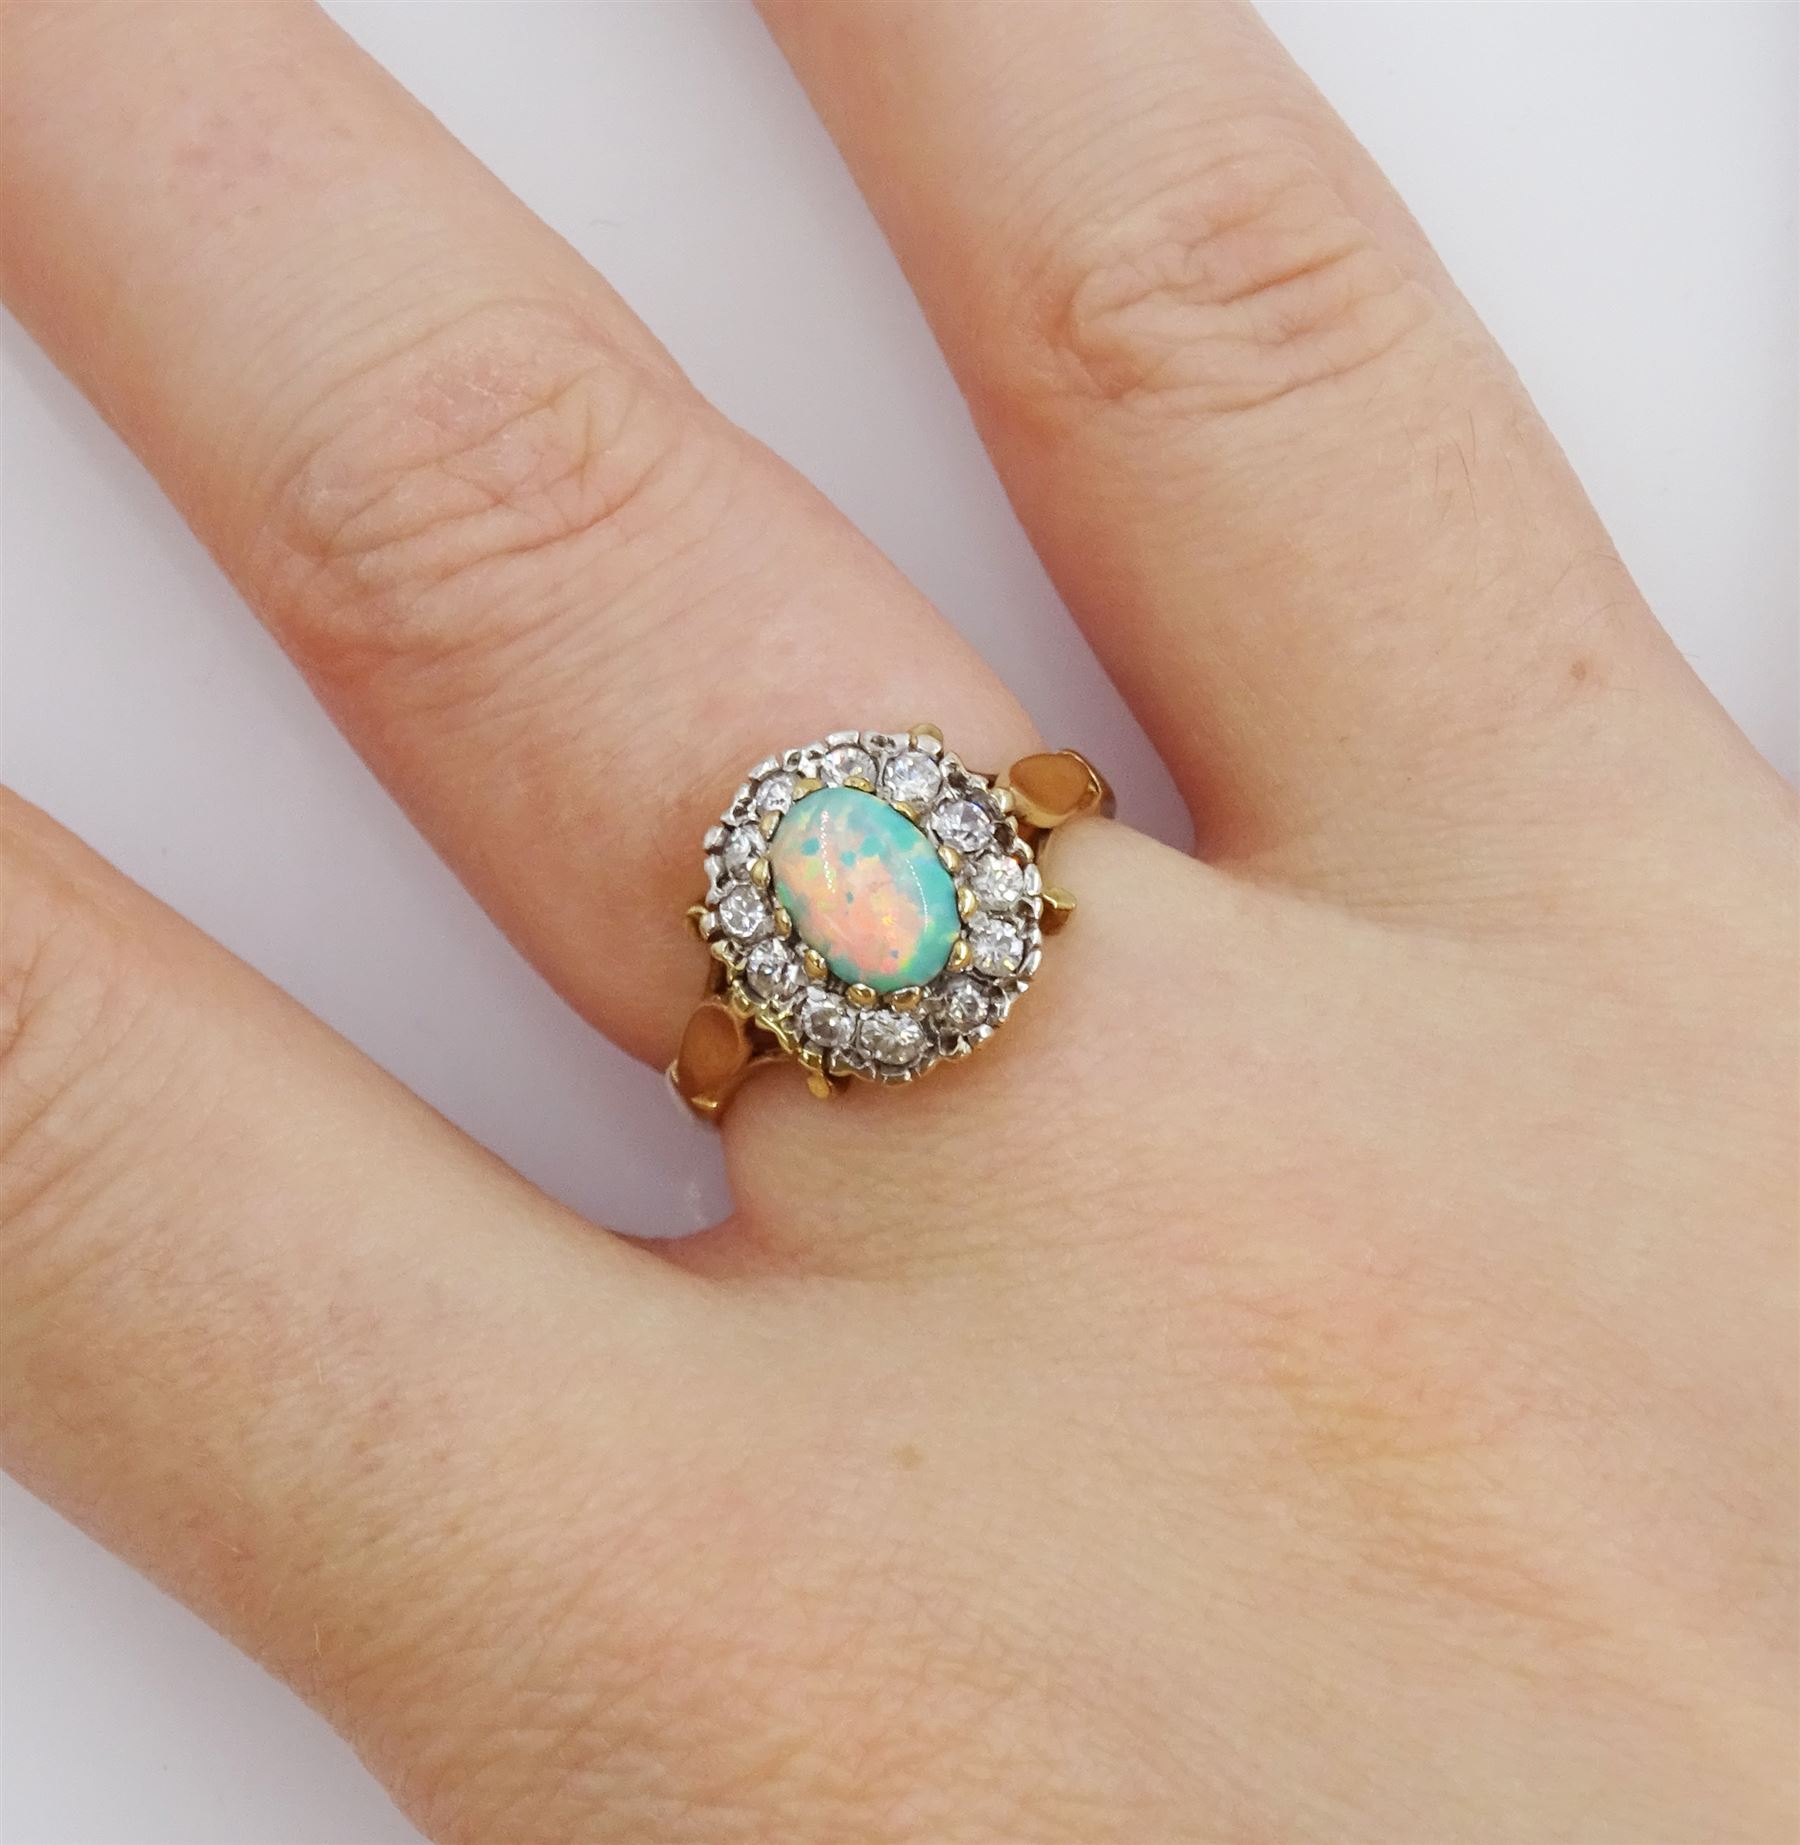 9ct gold opal and cubic zirconia cluster ring - Image 2 of 4